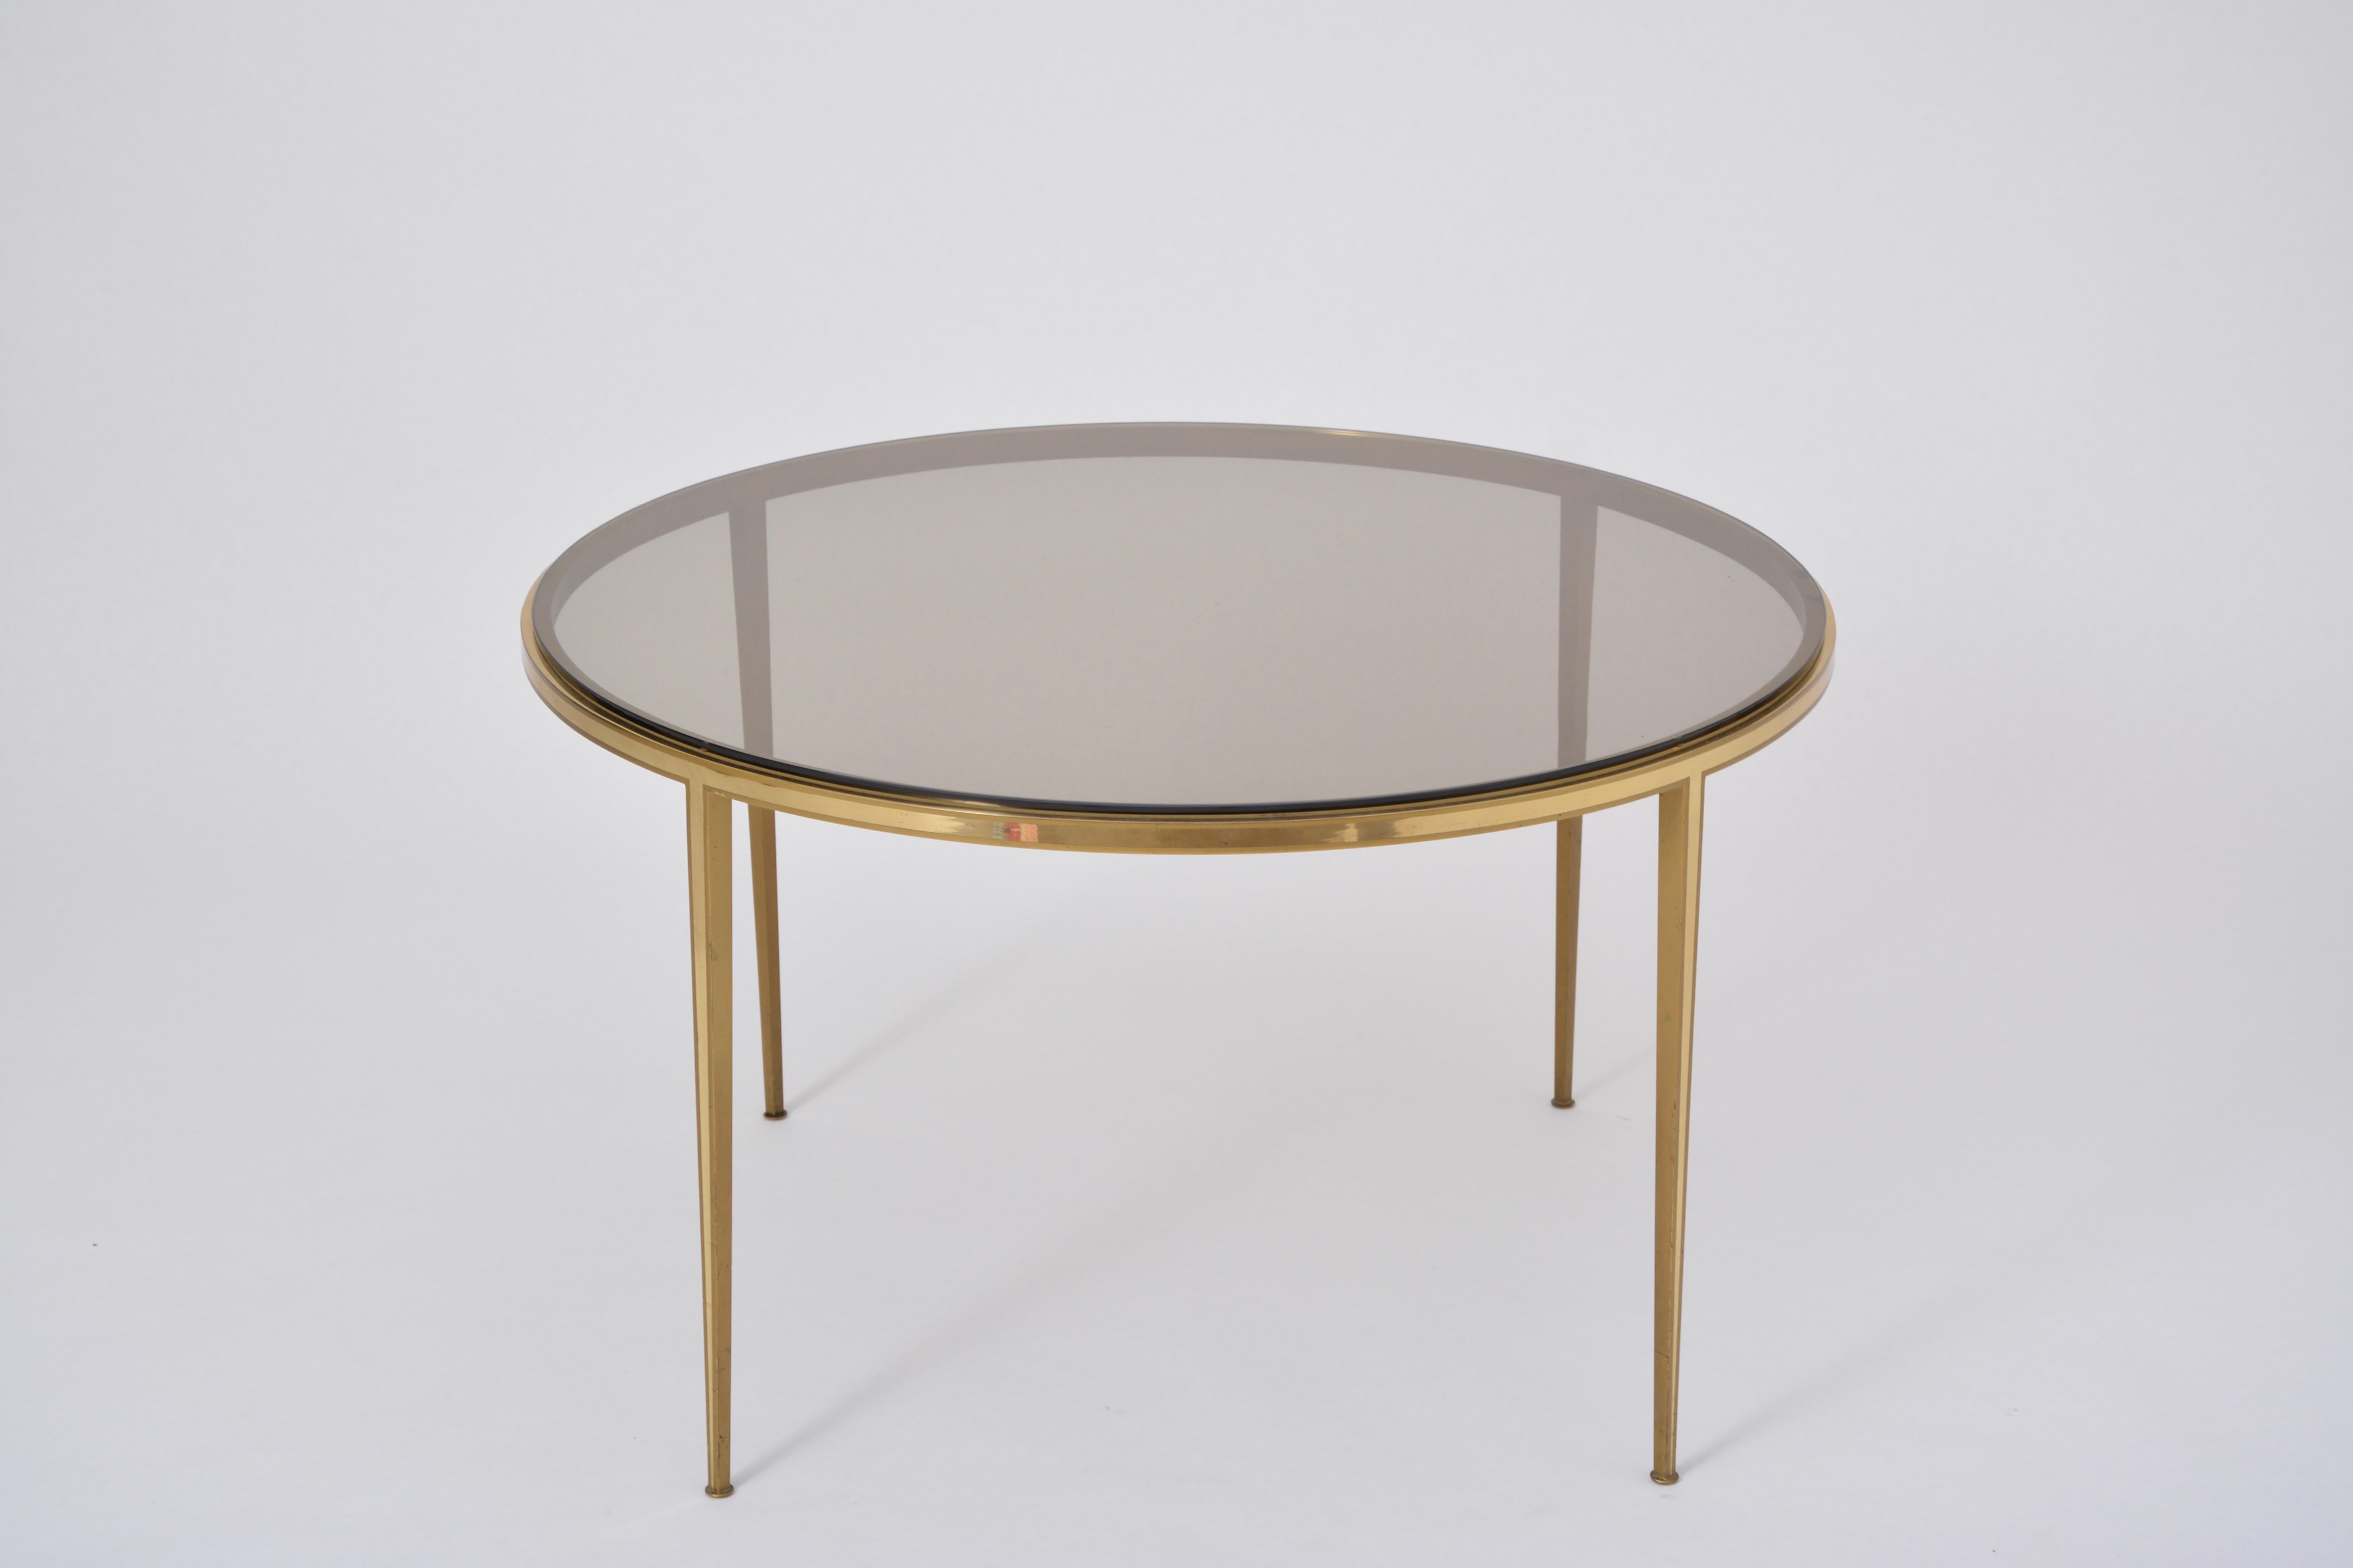 Golden circular Mid-Century Modern Brass coffee table by Vereinigte Werkstätten

Circular coffee table produced by Vereinigte Werkstätten München in the 1960s. The top is made of smoked glass. Normal signs of wear, light scratches to the glass top.